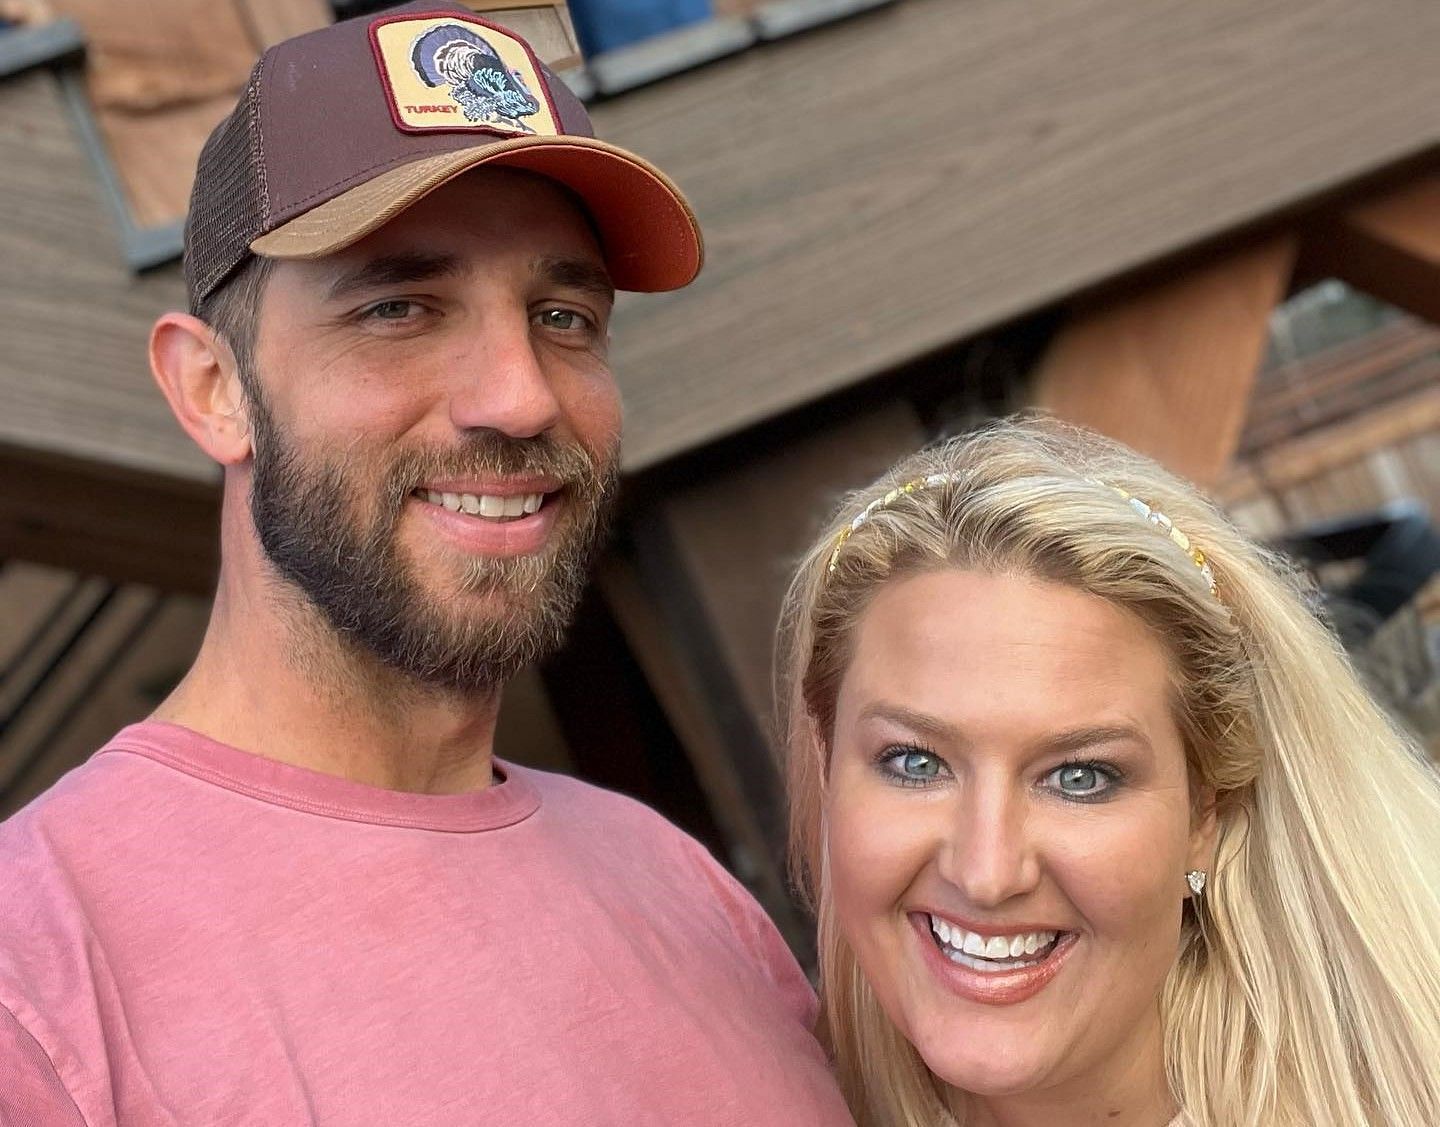 Madison Bumgarner and his wife Ali Saunders have thrived, even under the pressure of fame